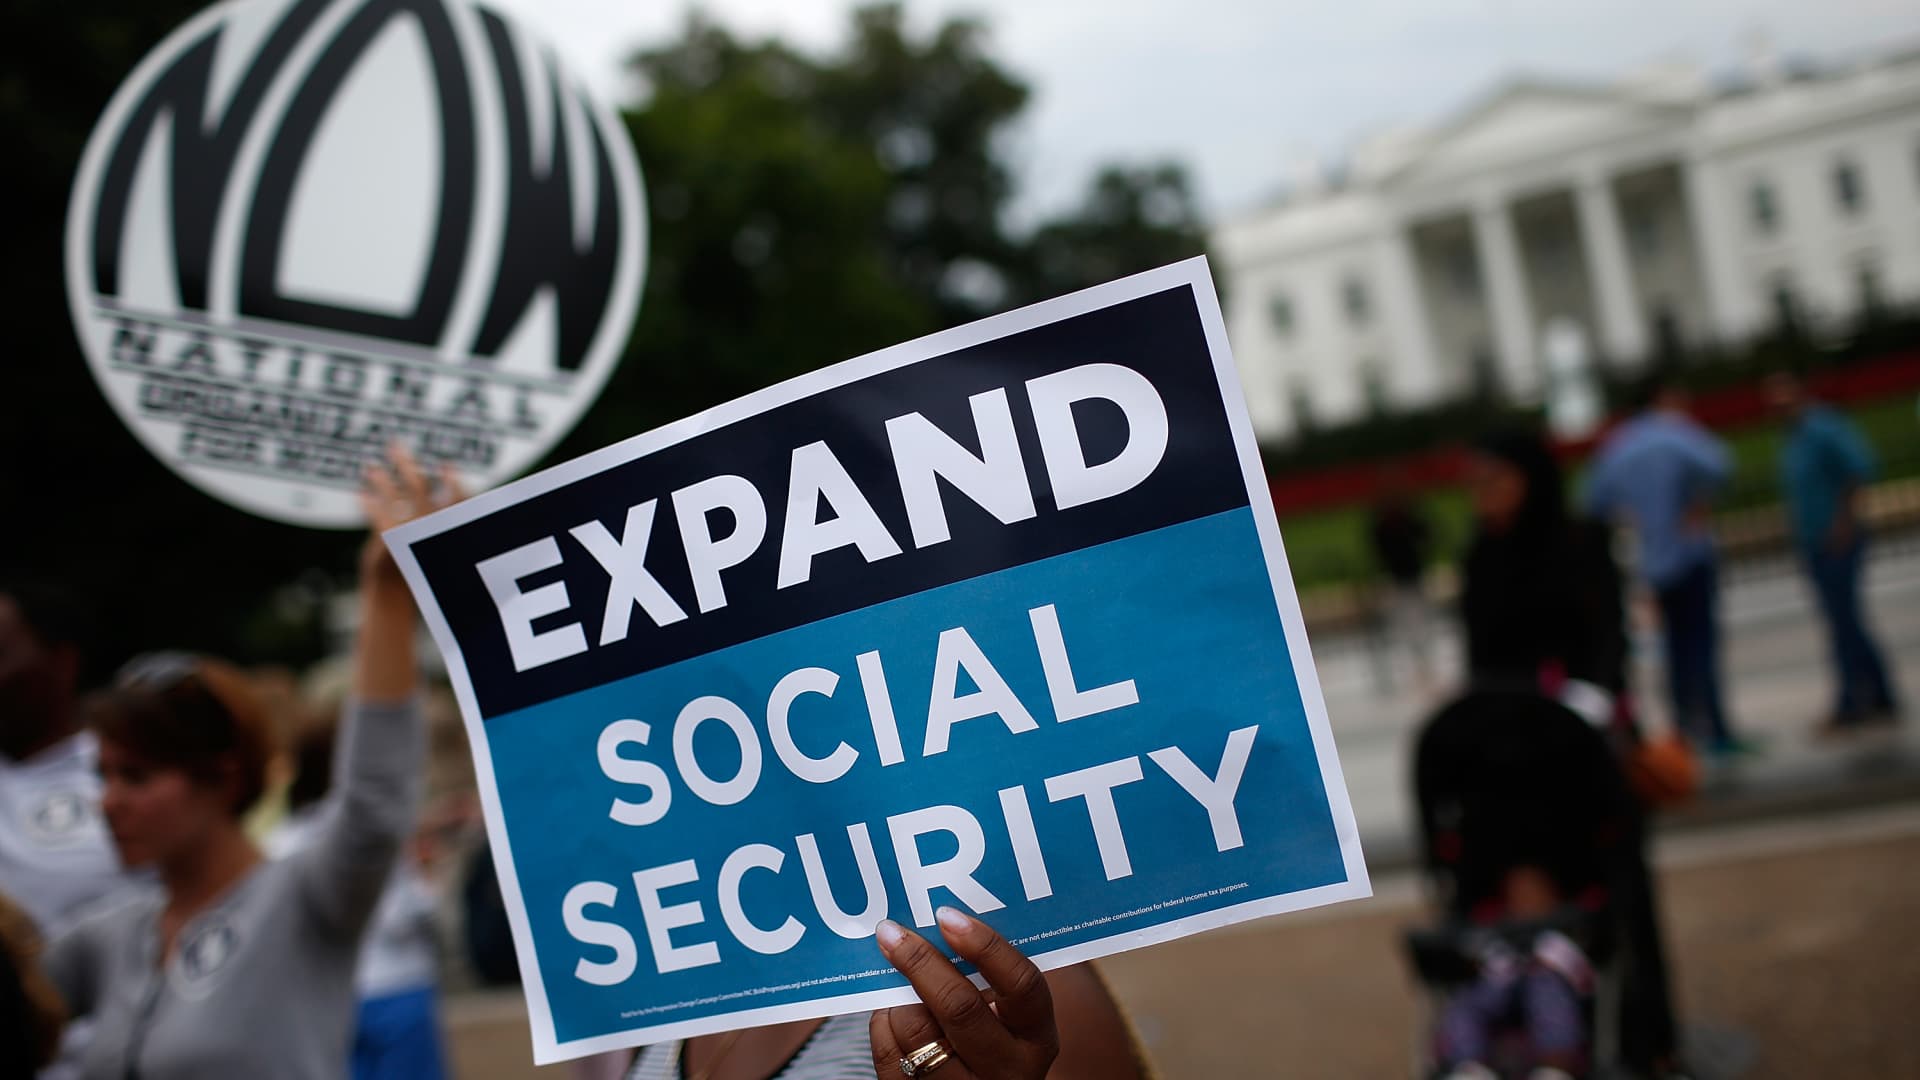 With 13 years until Social Security’s funds are projected to run out, Washington Democrats have some proposals to strengthen the program